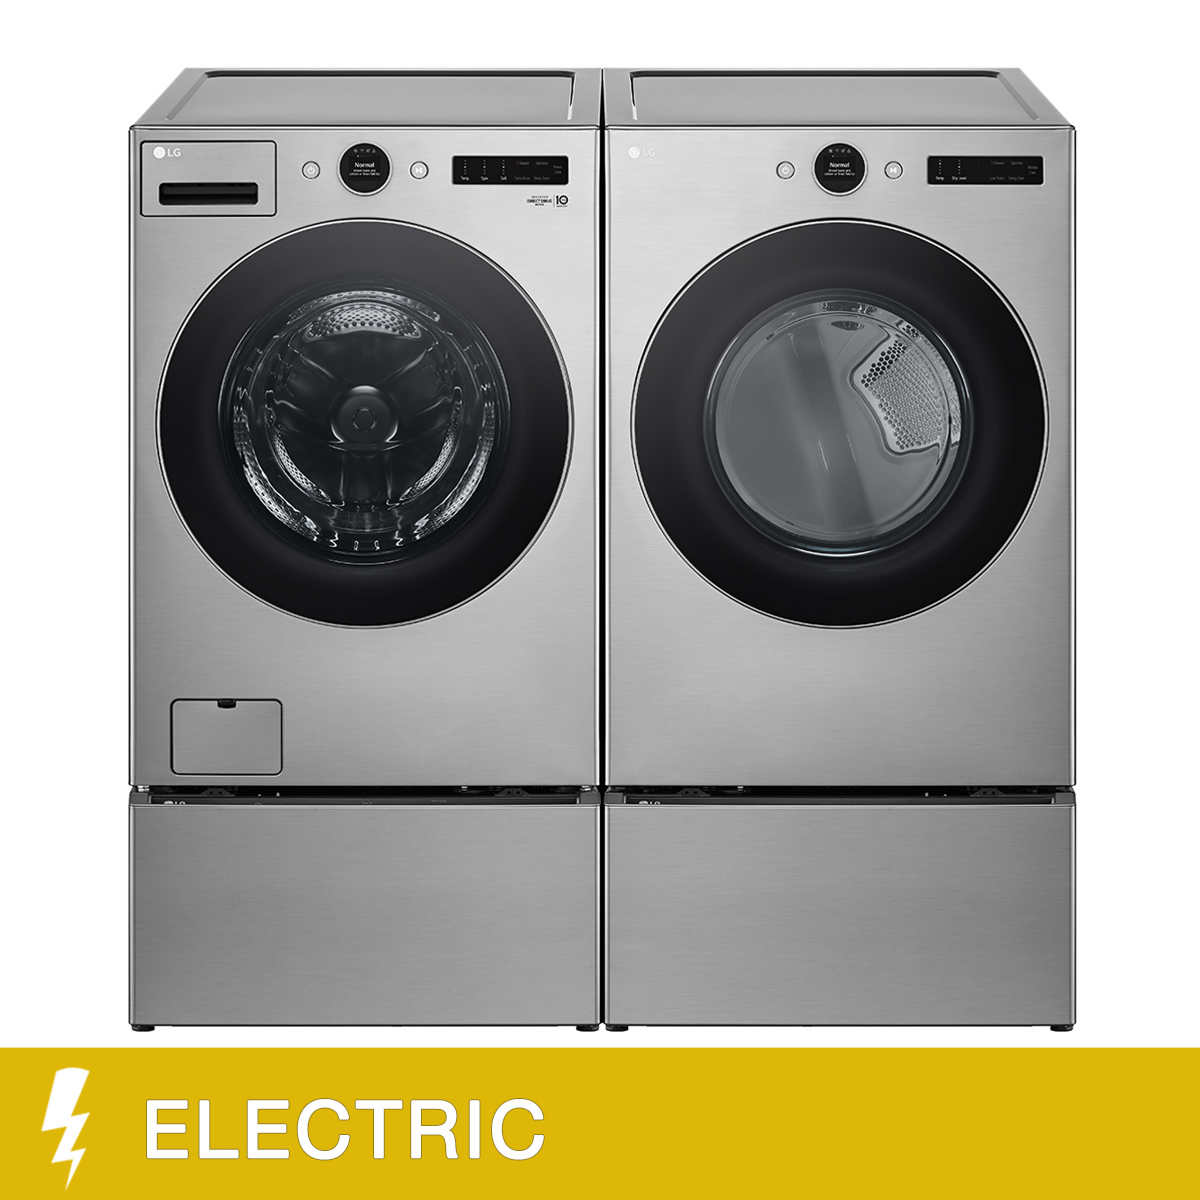 LG 4-piece Graphite Steel Laundry Suite with 5.2 cu. ft. Front Load Washer  and 7.4 cu. ft. Electric Dryer and Sidekick and Pedestal Storage Drawer |  Costco